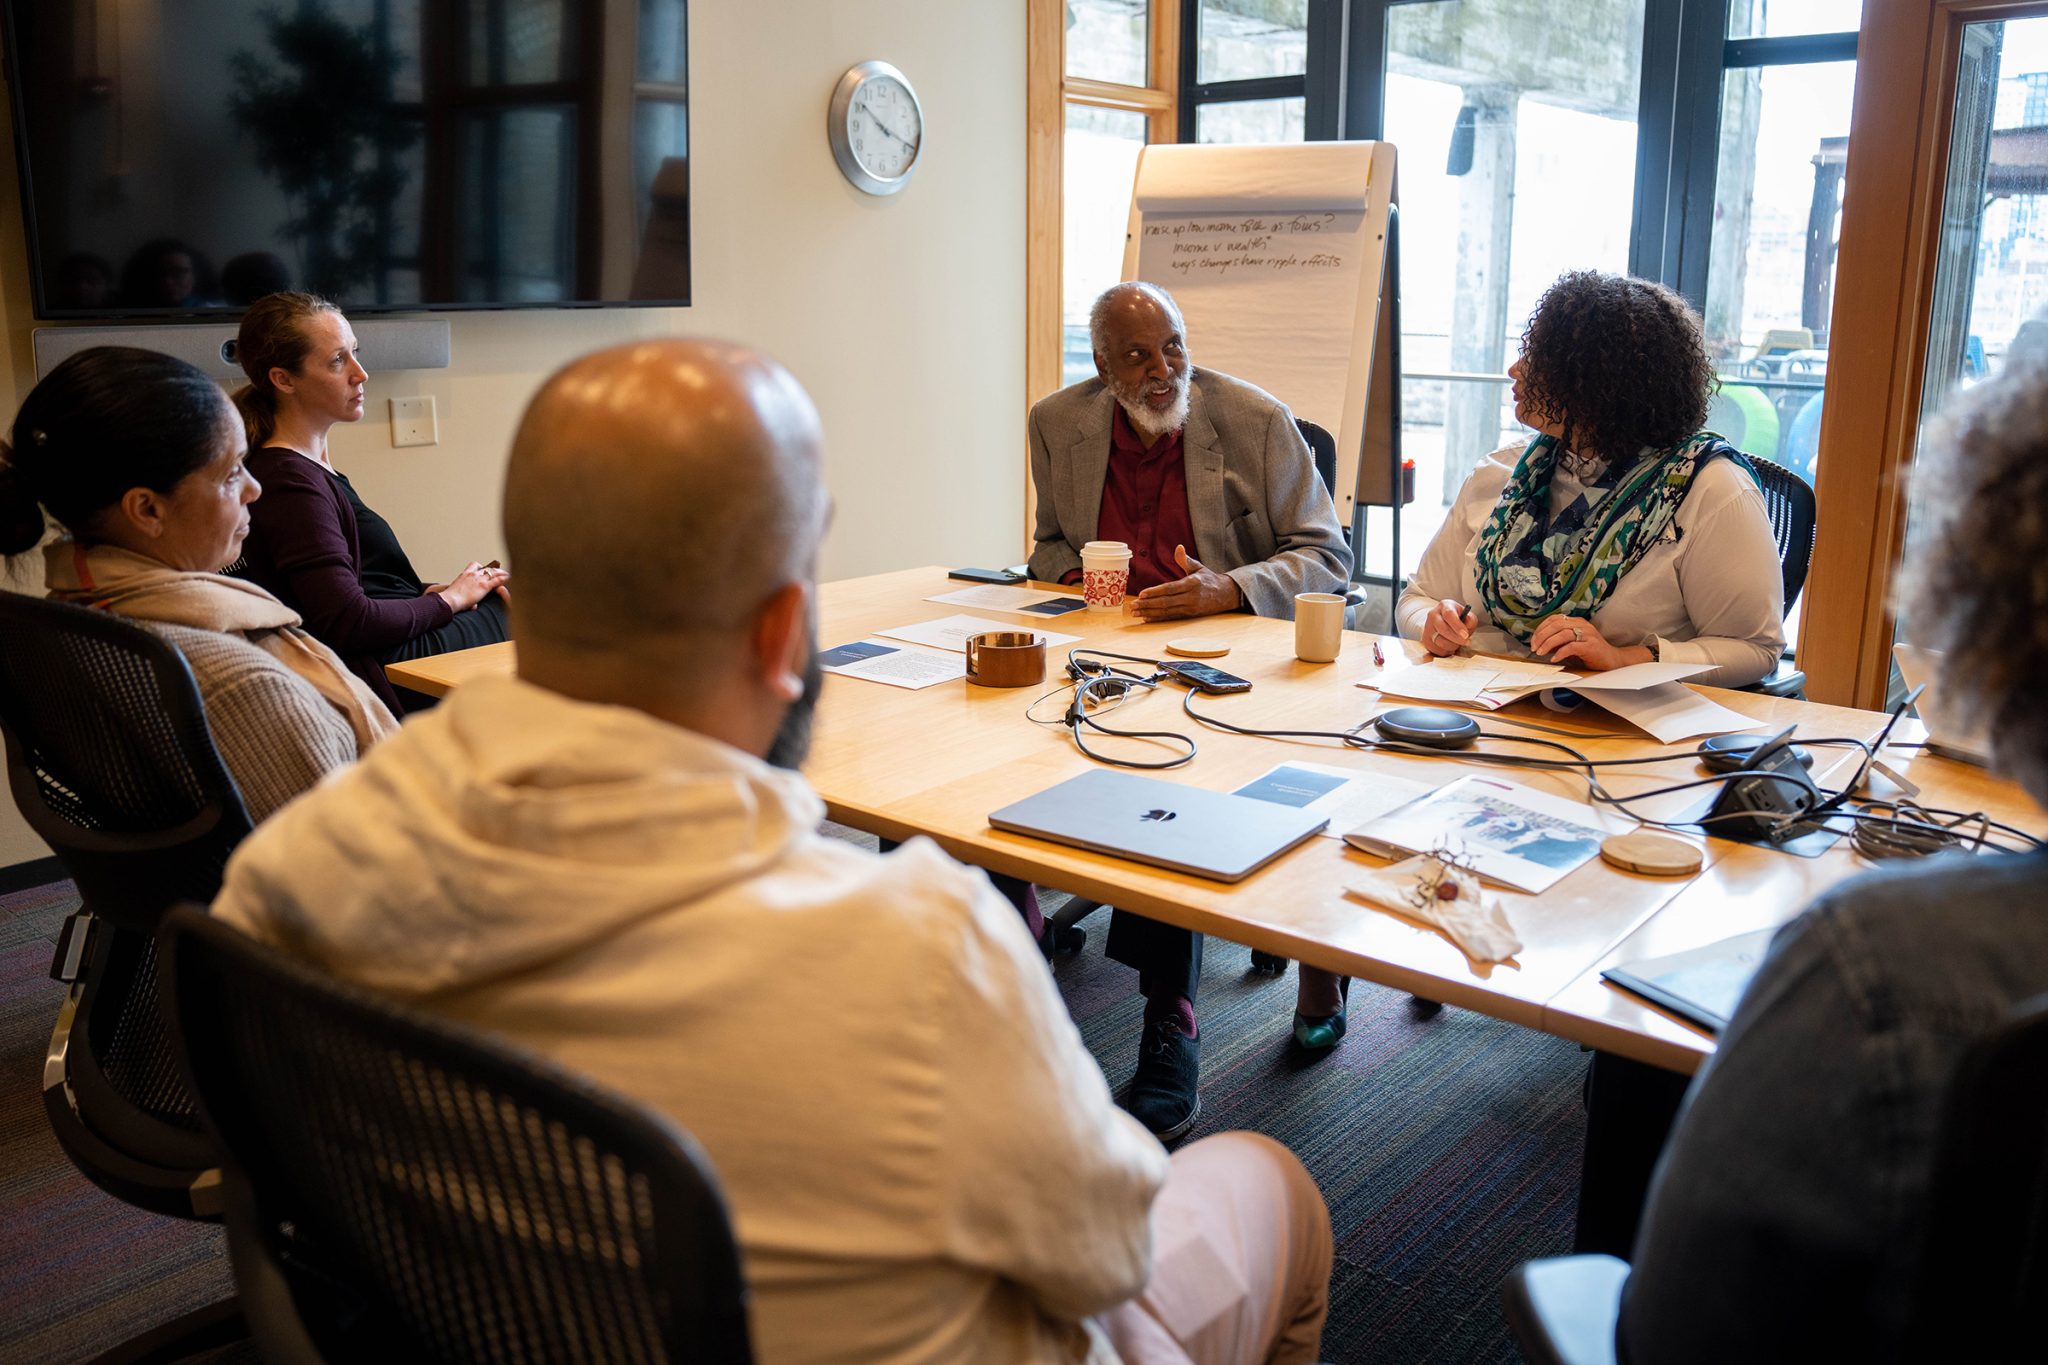 powell shares insights with McKnight's Vibrant & Equitable Communities Program Advisory Panel. Photo credit: Molly Miles